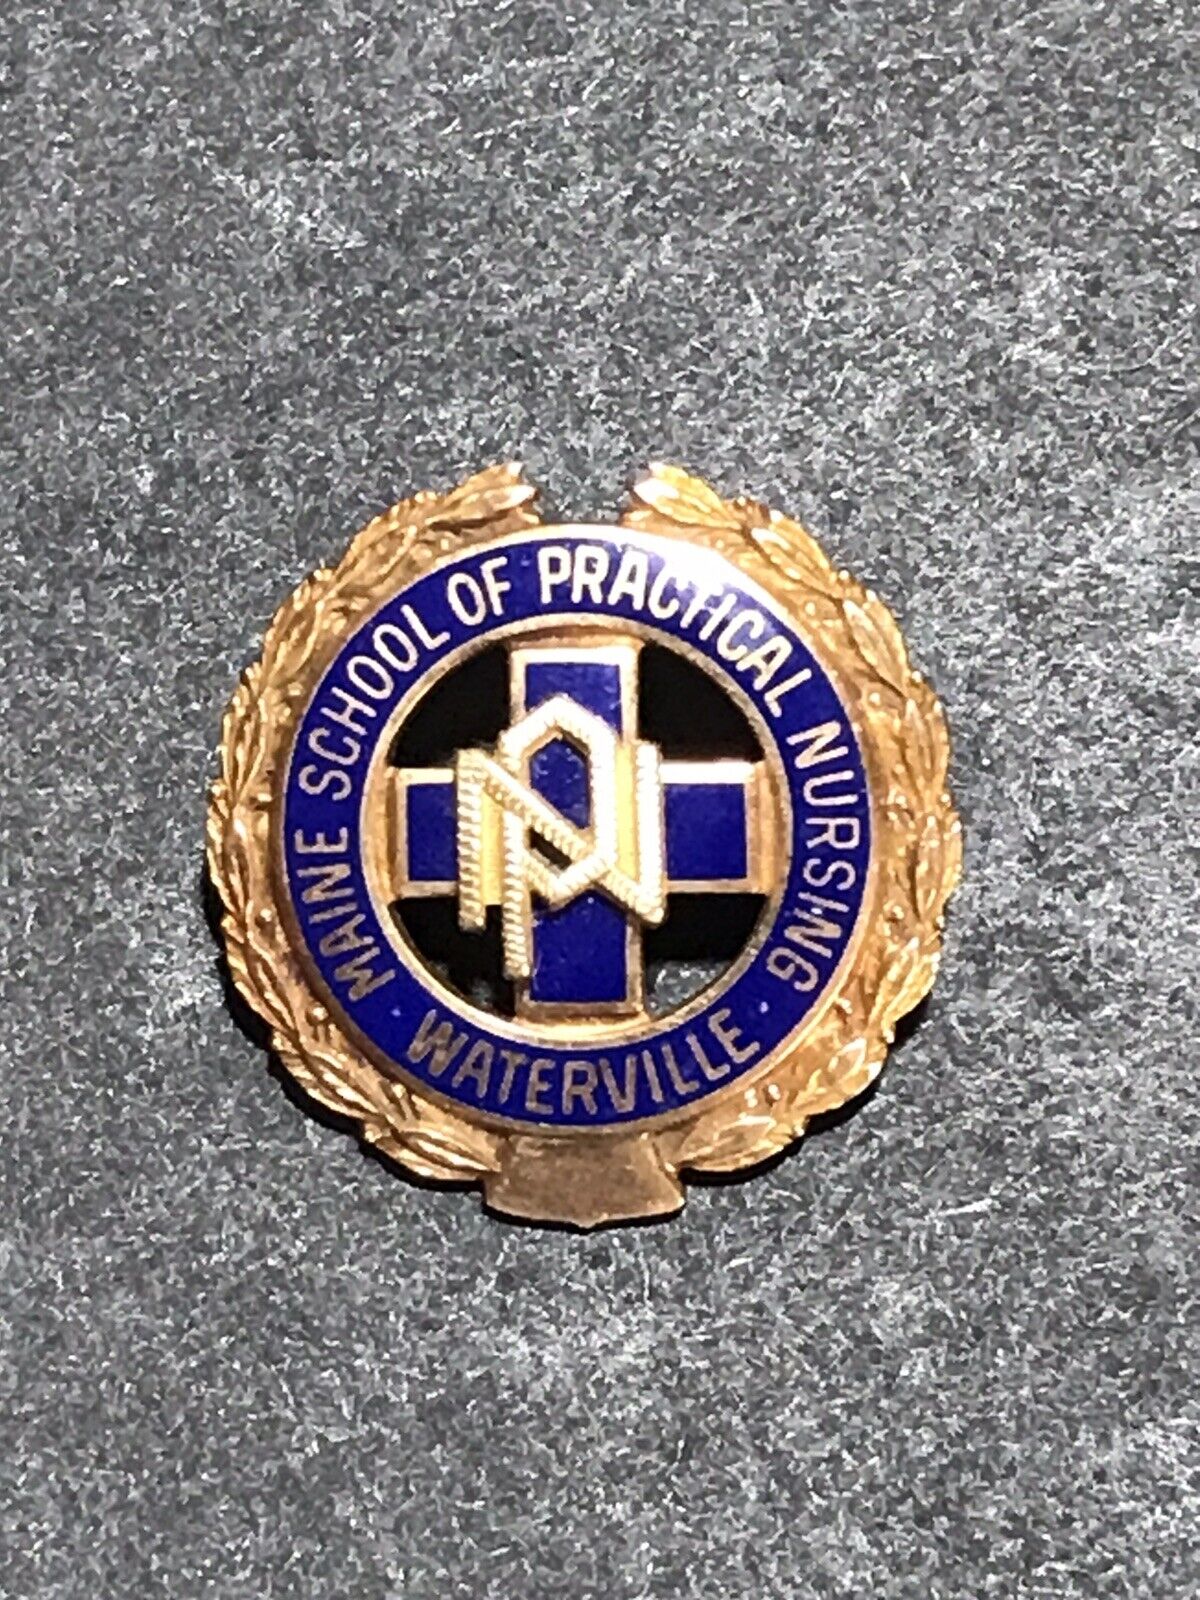 Maine School Of Practical Nursing Waterville 1964 10k 5.06gr Gold Pin Pre-owned